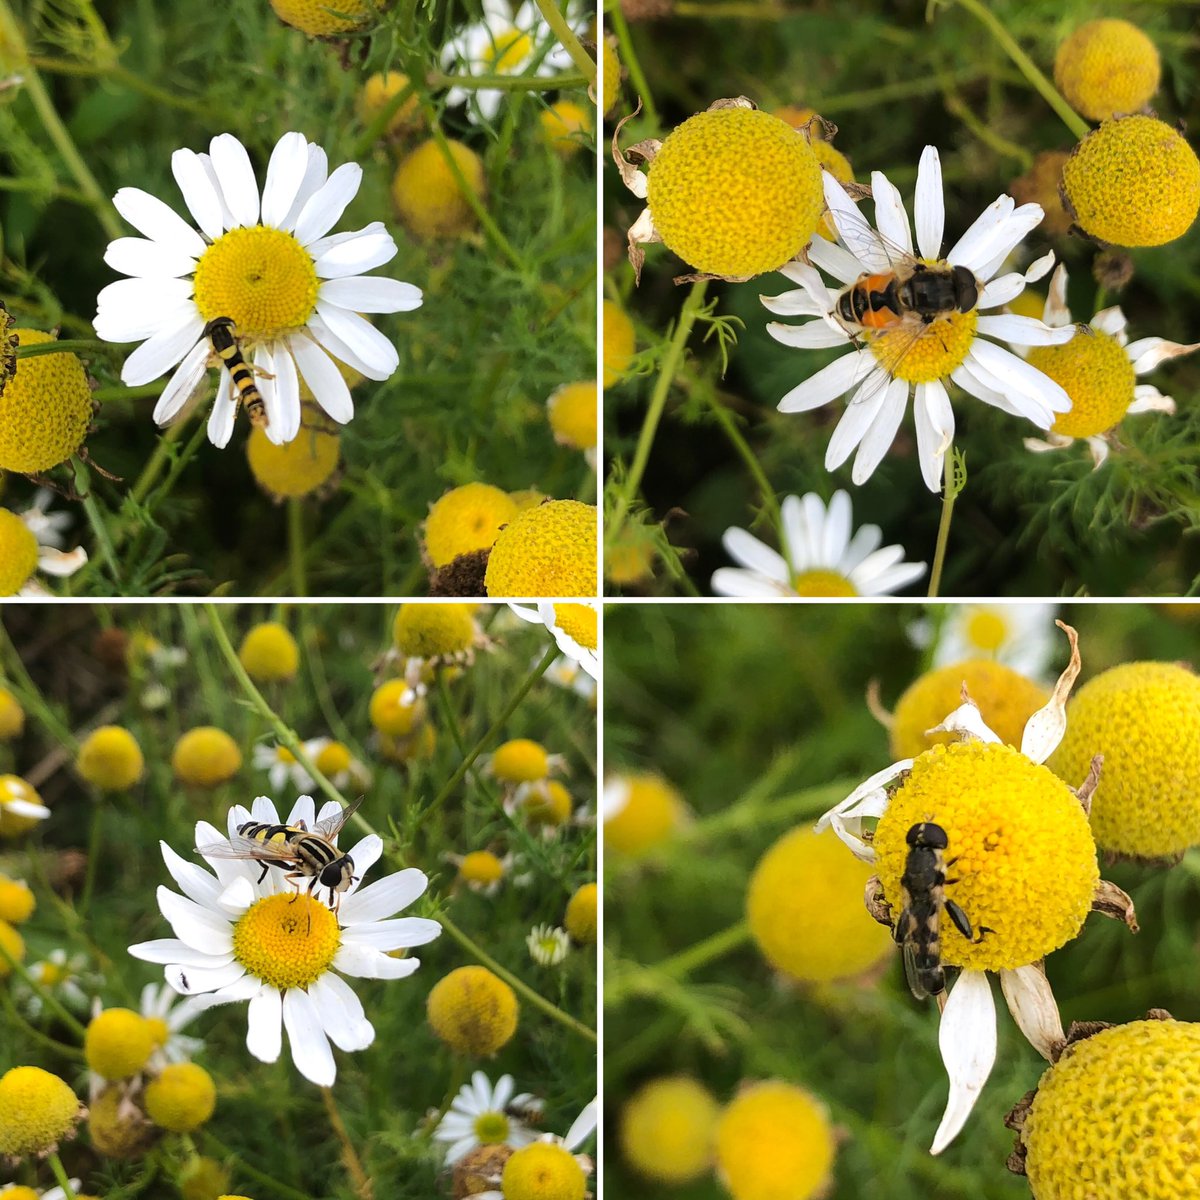 Anyone any ideas what these are enjoying the last of the mayweed. Just a few of the ones I found @NHM_Diptera #diptera #farmbiodiversity